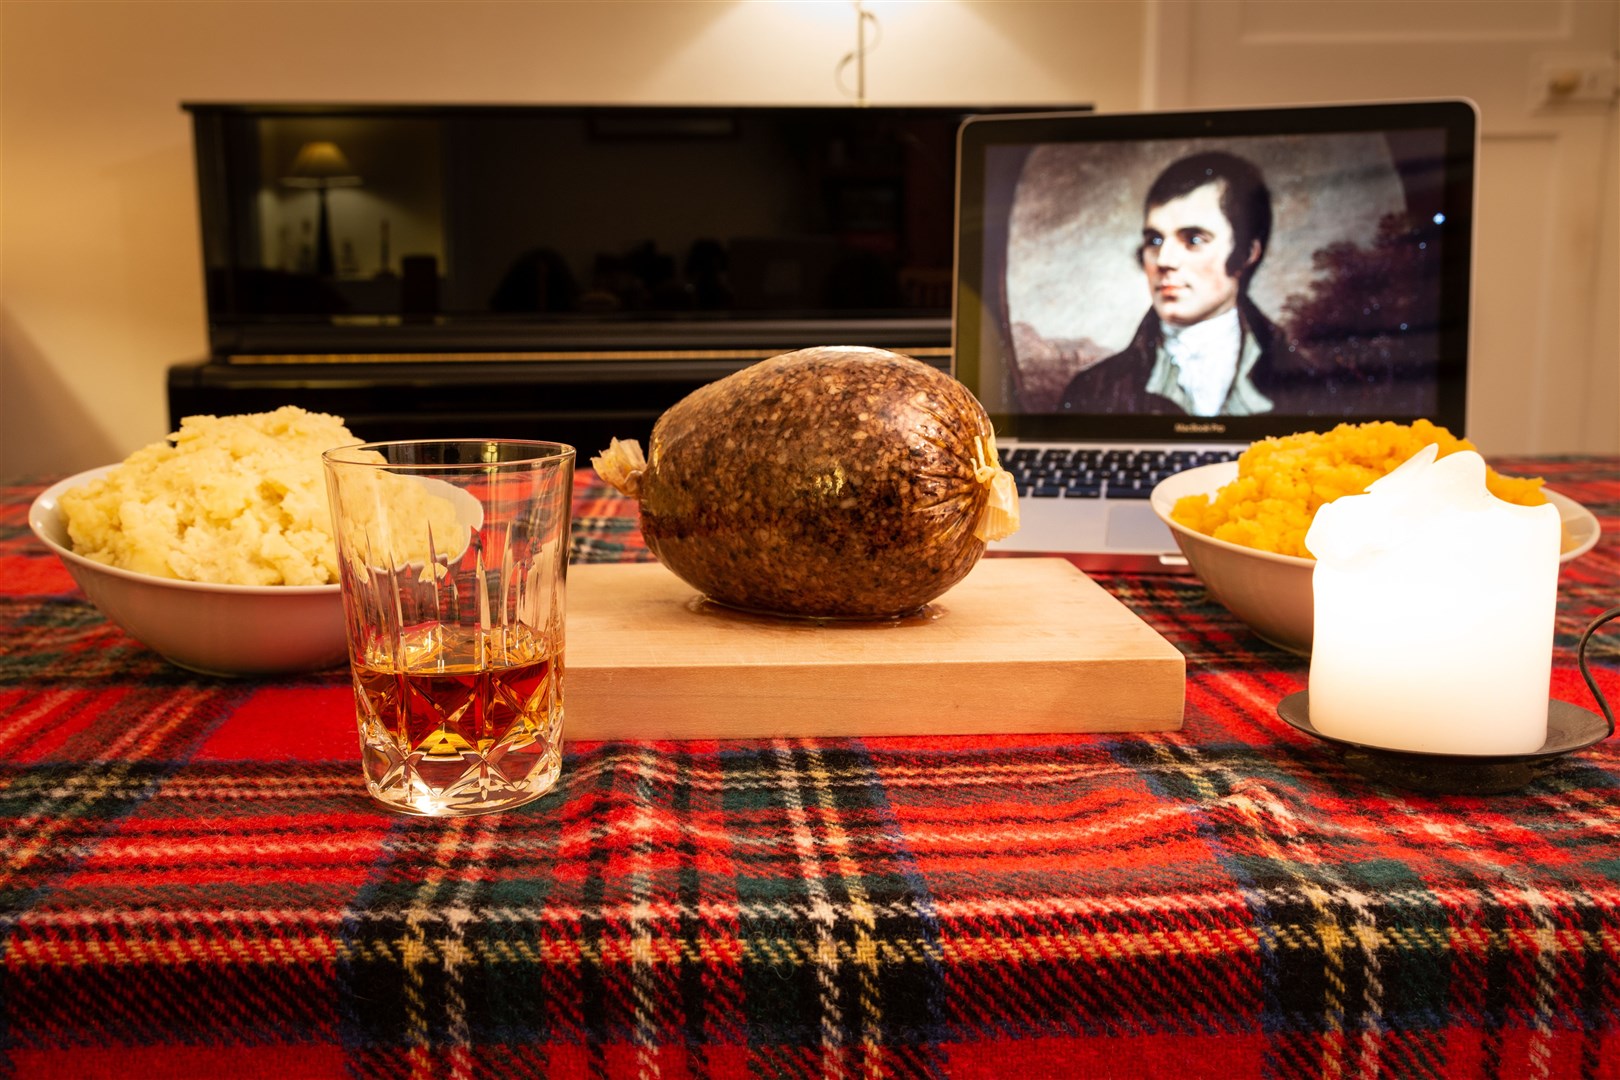 Across the country people will be celebrating Burns Night.